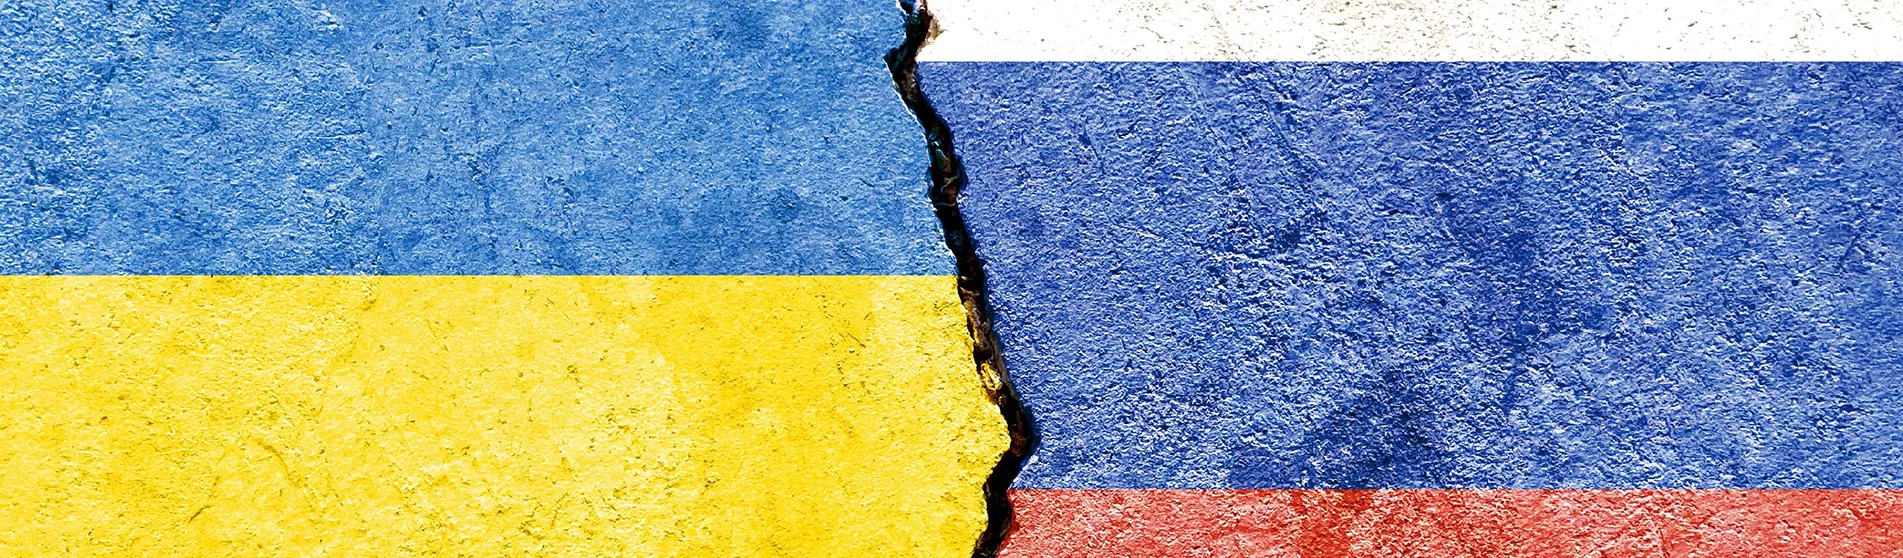 ukraine and russia's flags painted on broken concrete